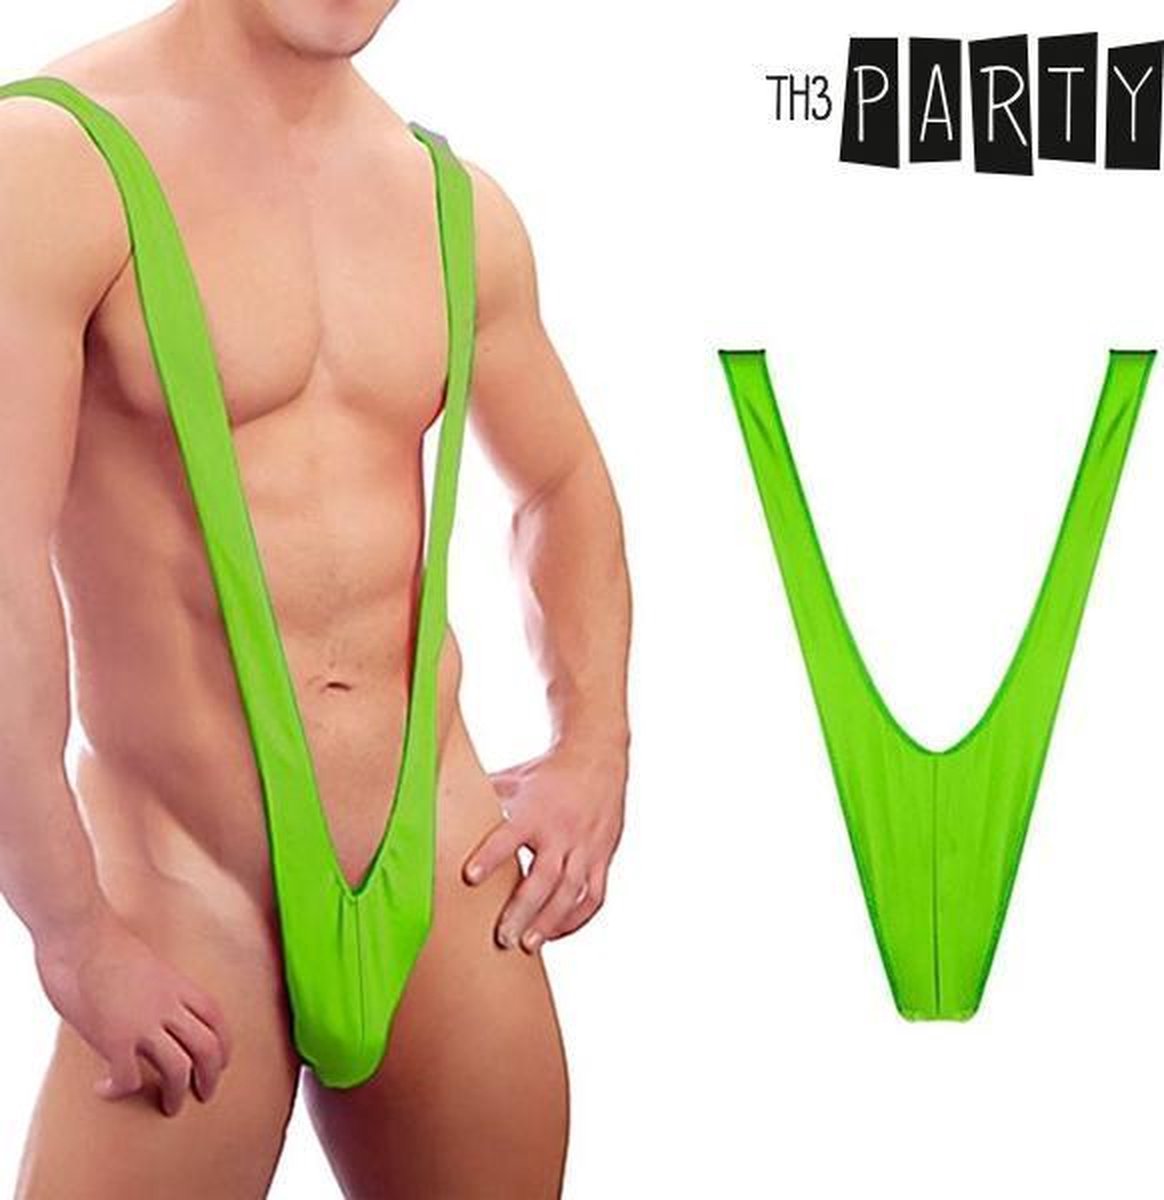 Mankini Borat string - Out of the Blue